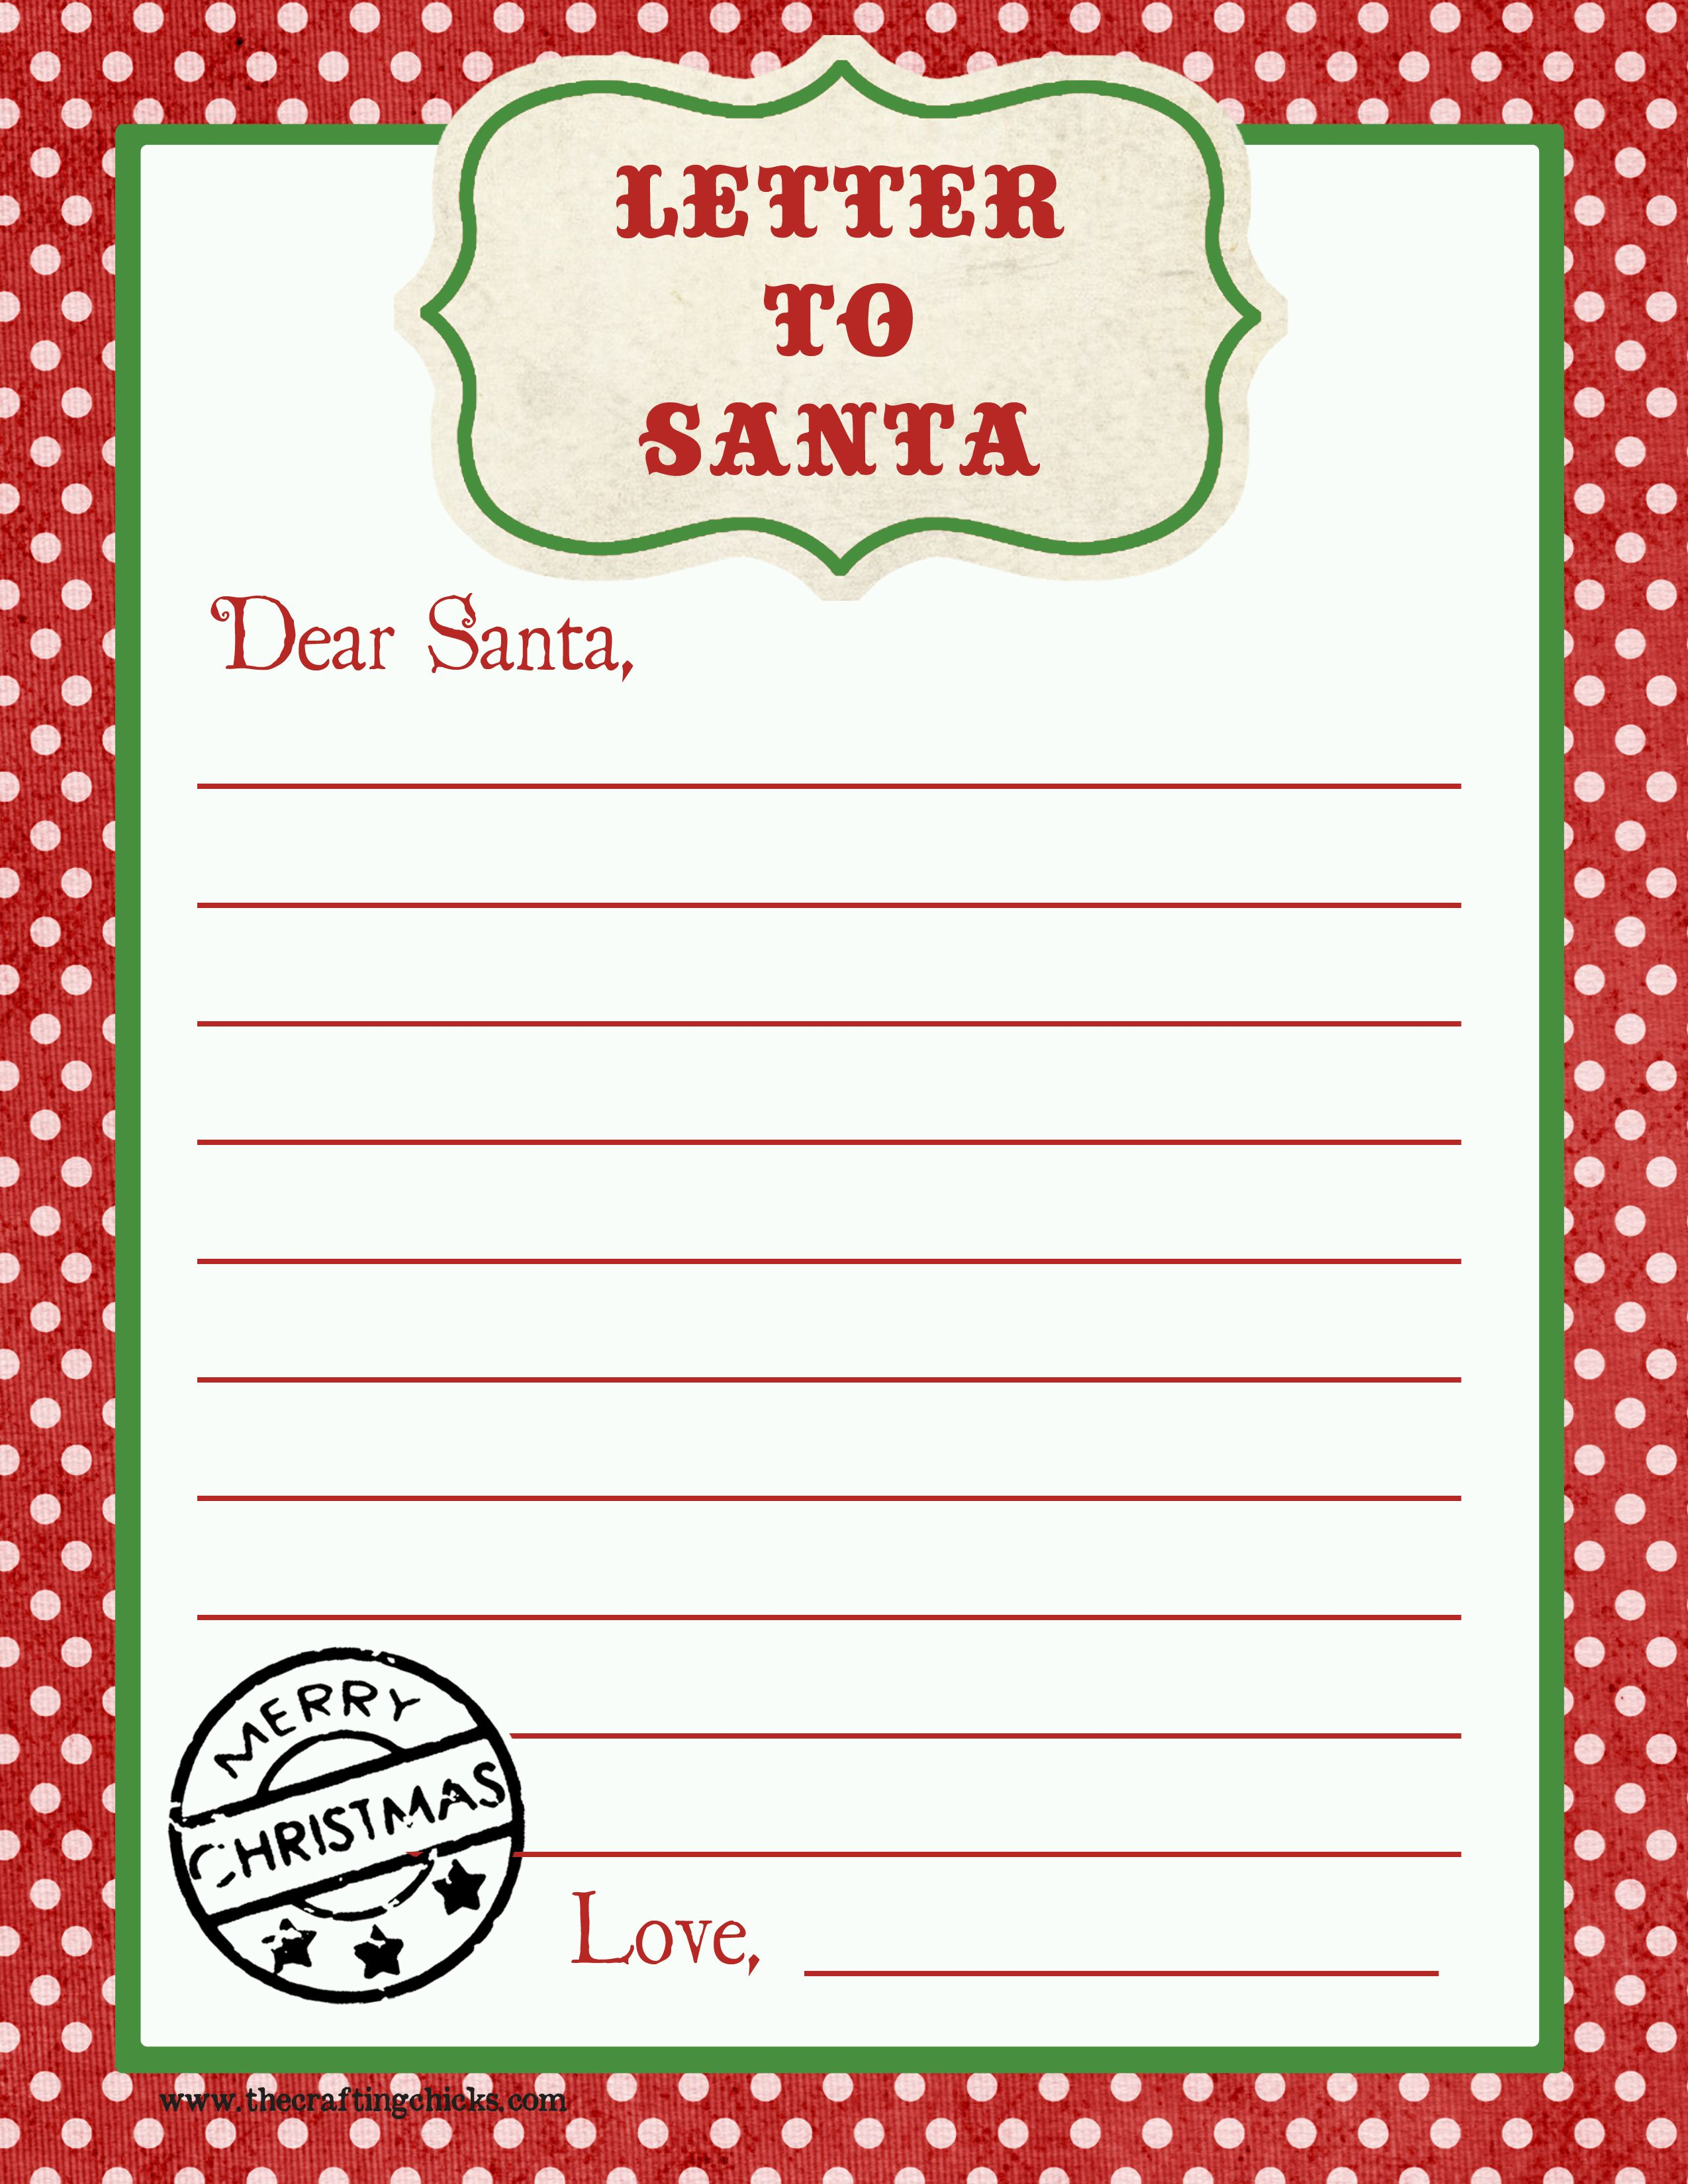 Letter From Santa Template Free Download - Letter to Santa Free Printable Download